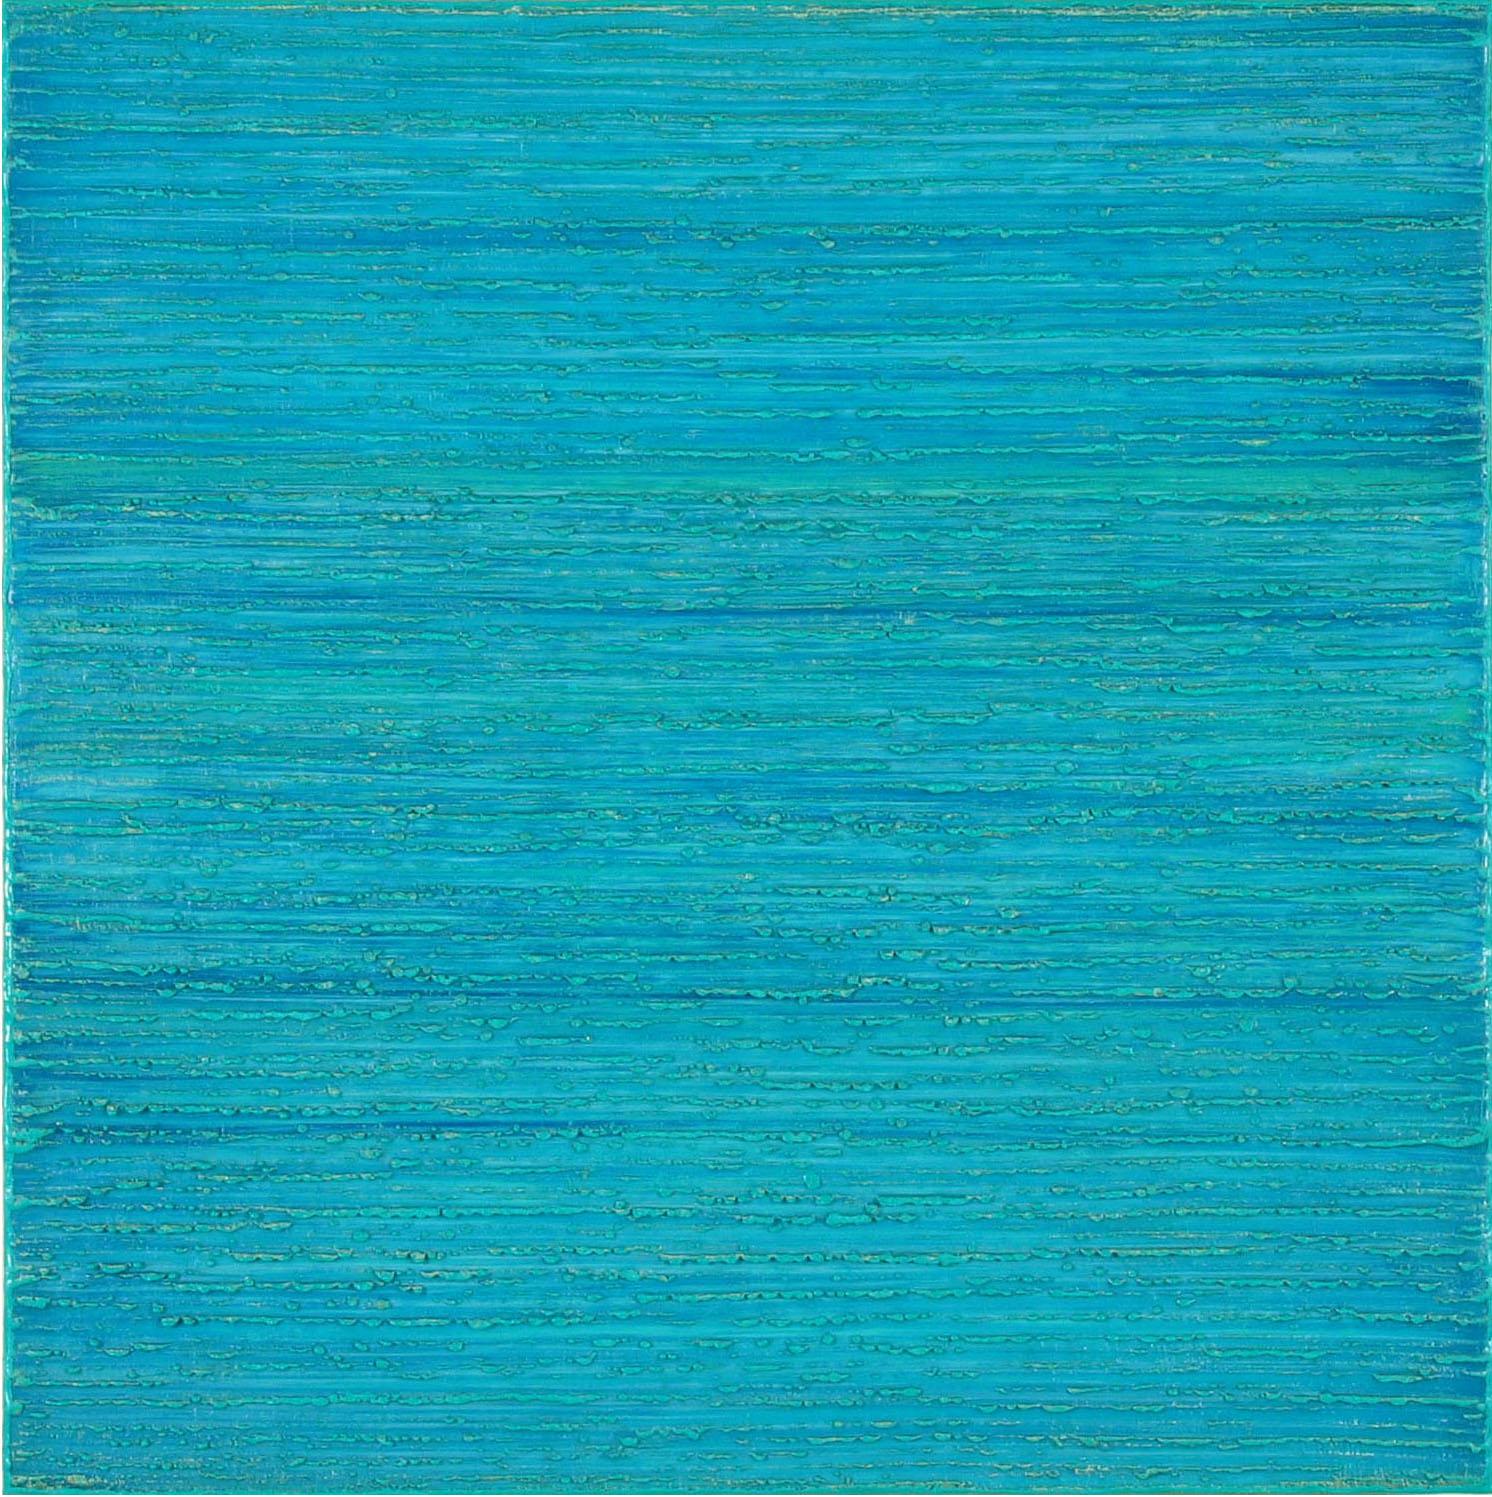 Silk Road 414, Bright Turquoise Blue, Teal Color Field Square Encaustic